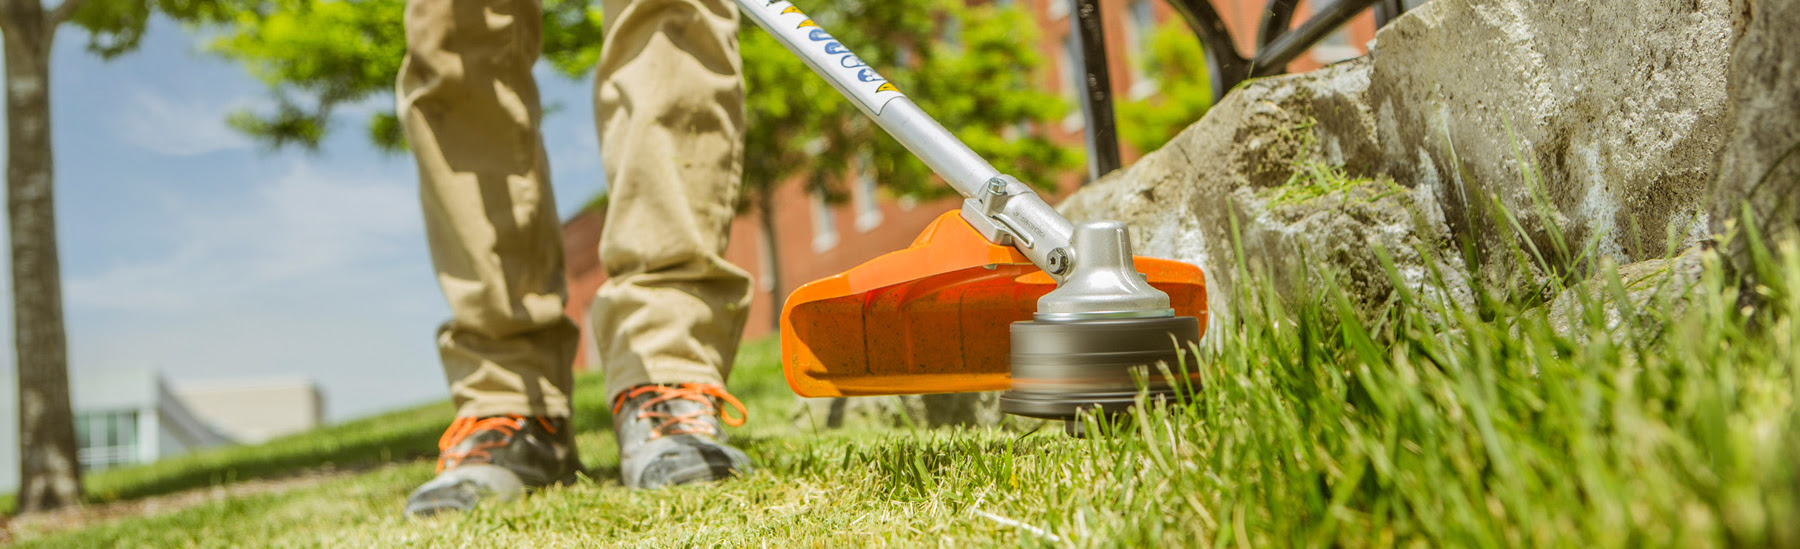 How to Start or Unflood Your STIHL Trimmer